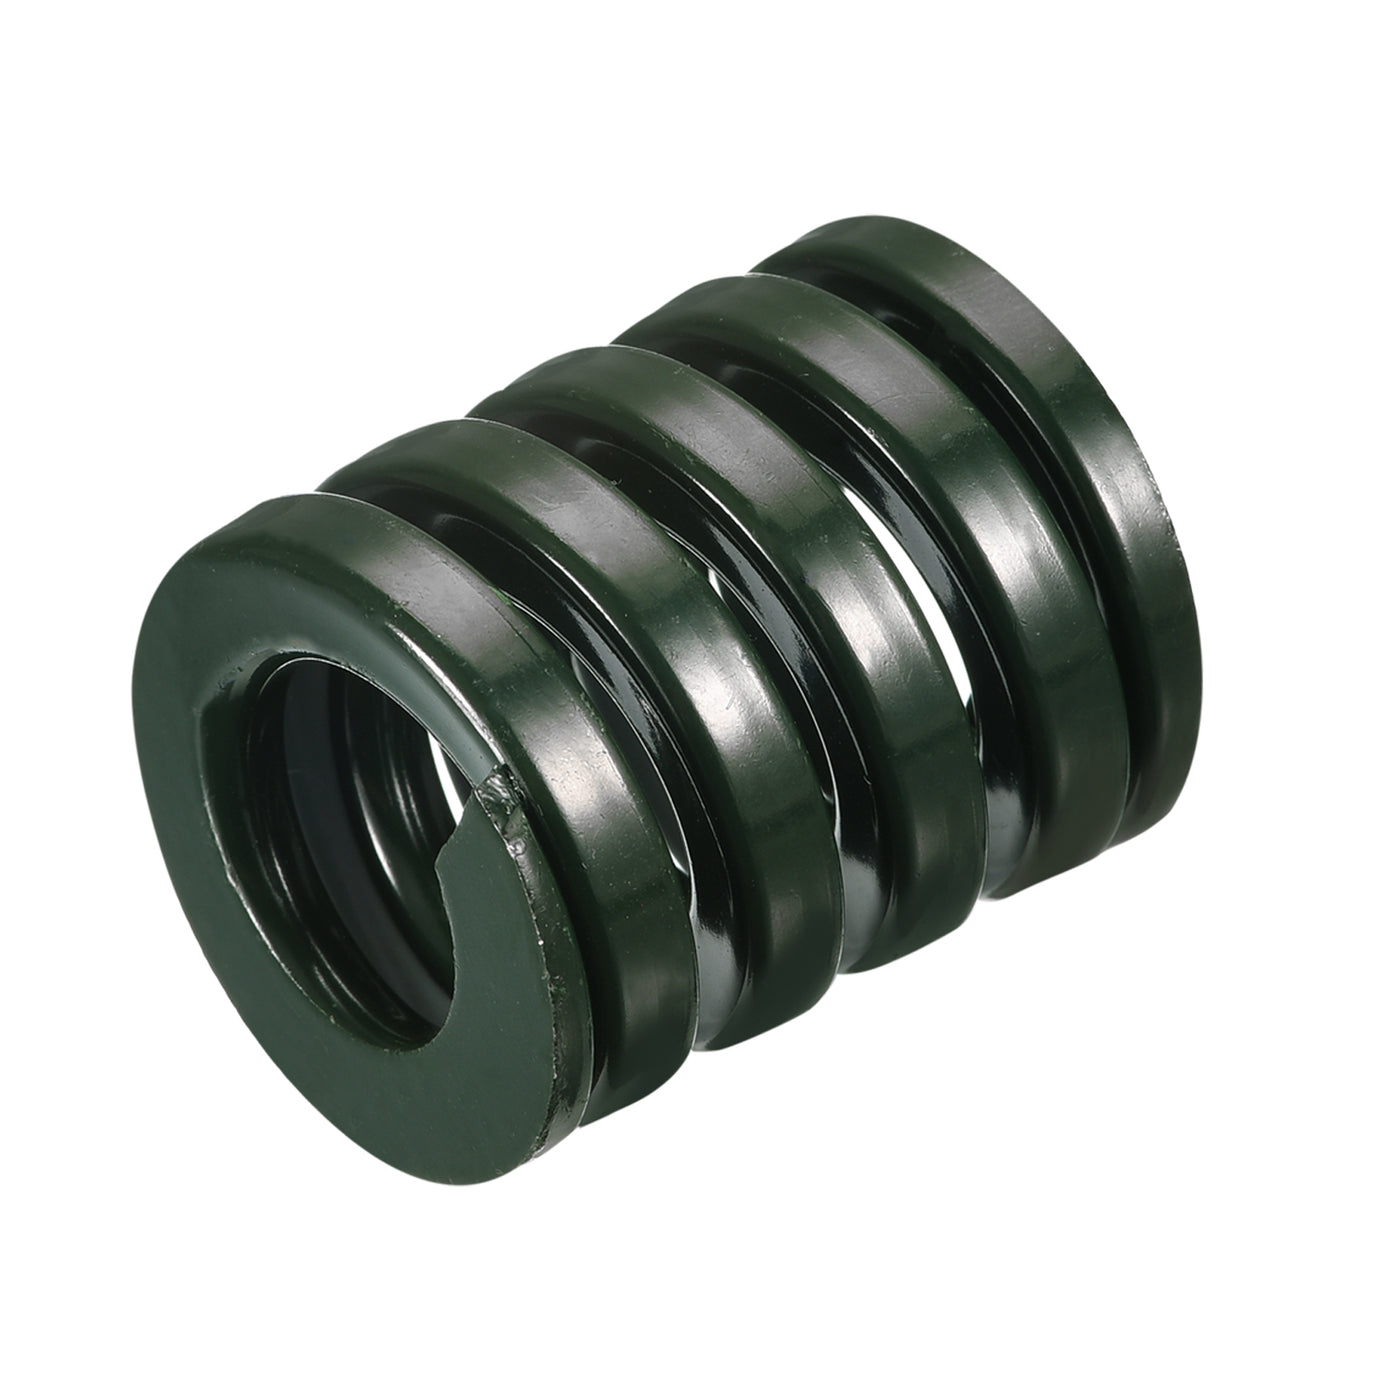 uxcell Uxcell 3D Printer Die Spring, 1pcs 30mm OD 35mm Long Spiral Stamping Compression Green